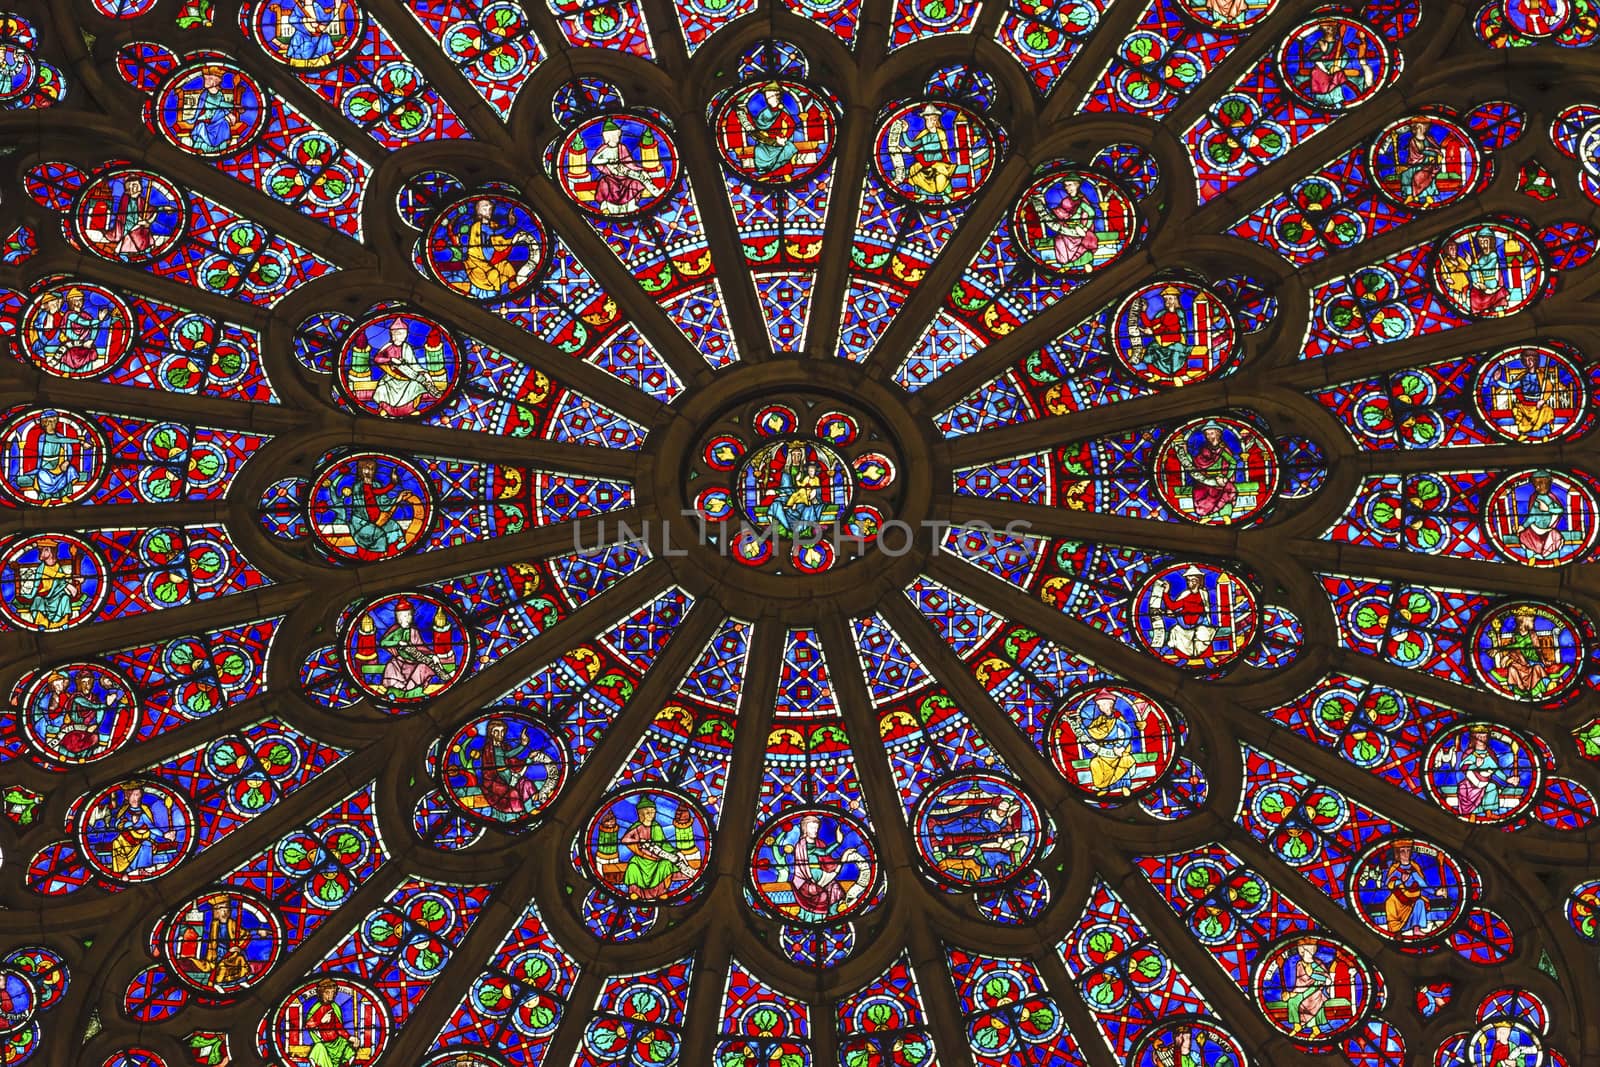 Rose Window Mary Jesus Stained Glass Notre Dame Cathedral Paris by bill_perry